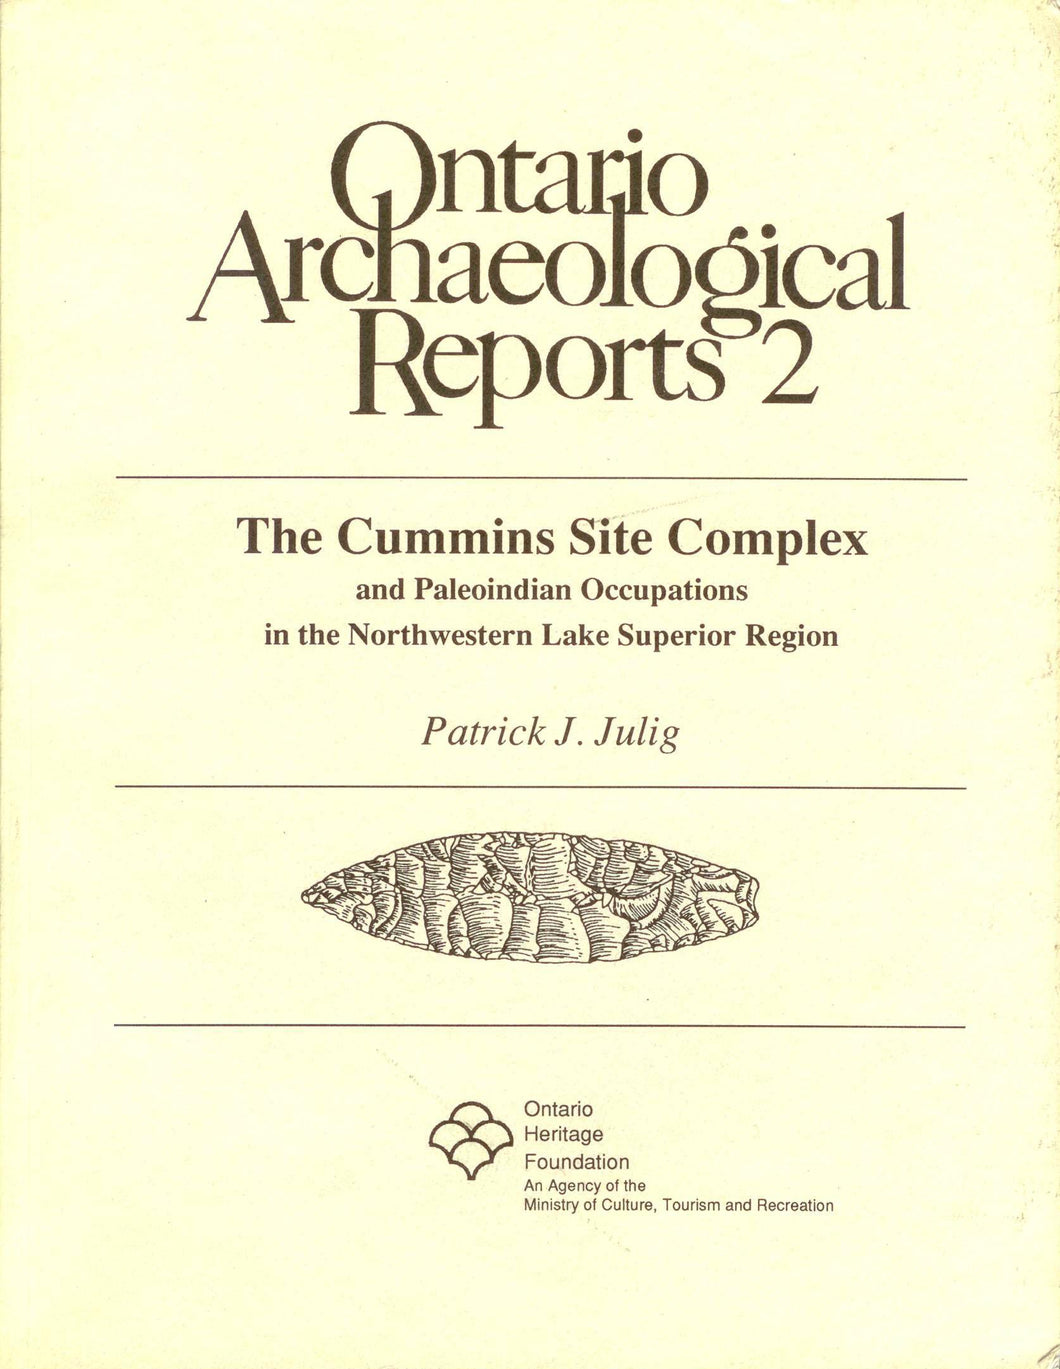 The Cummins Site Complex and Paleoindian Occupations in the Northwestern Lake Superior Region